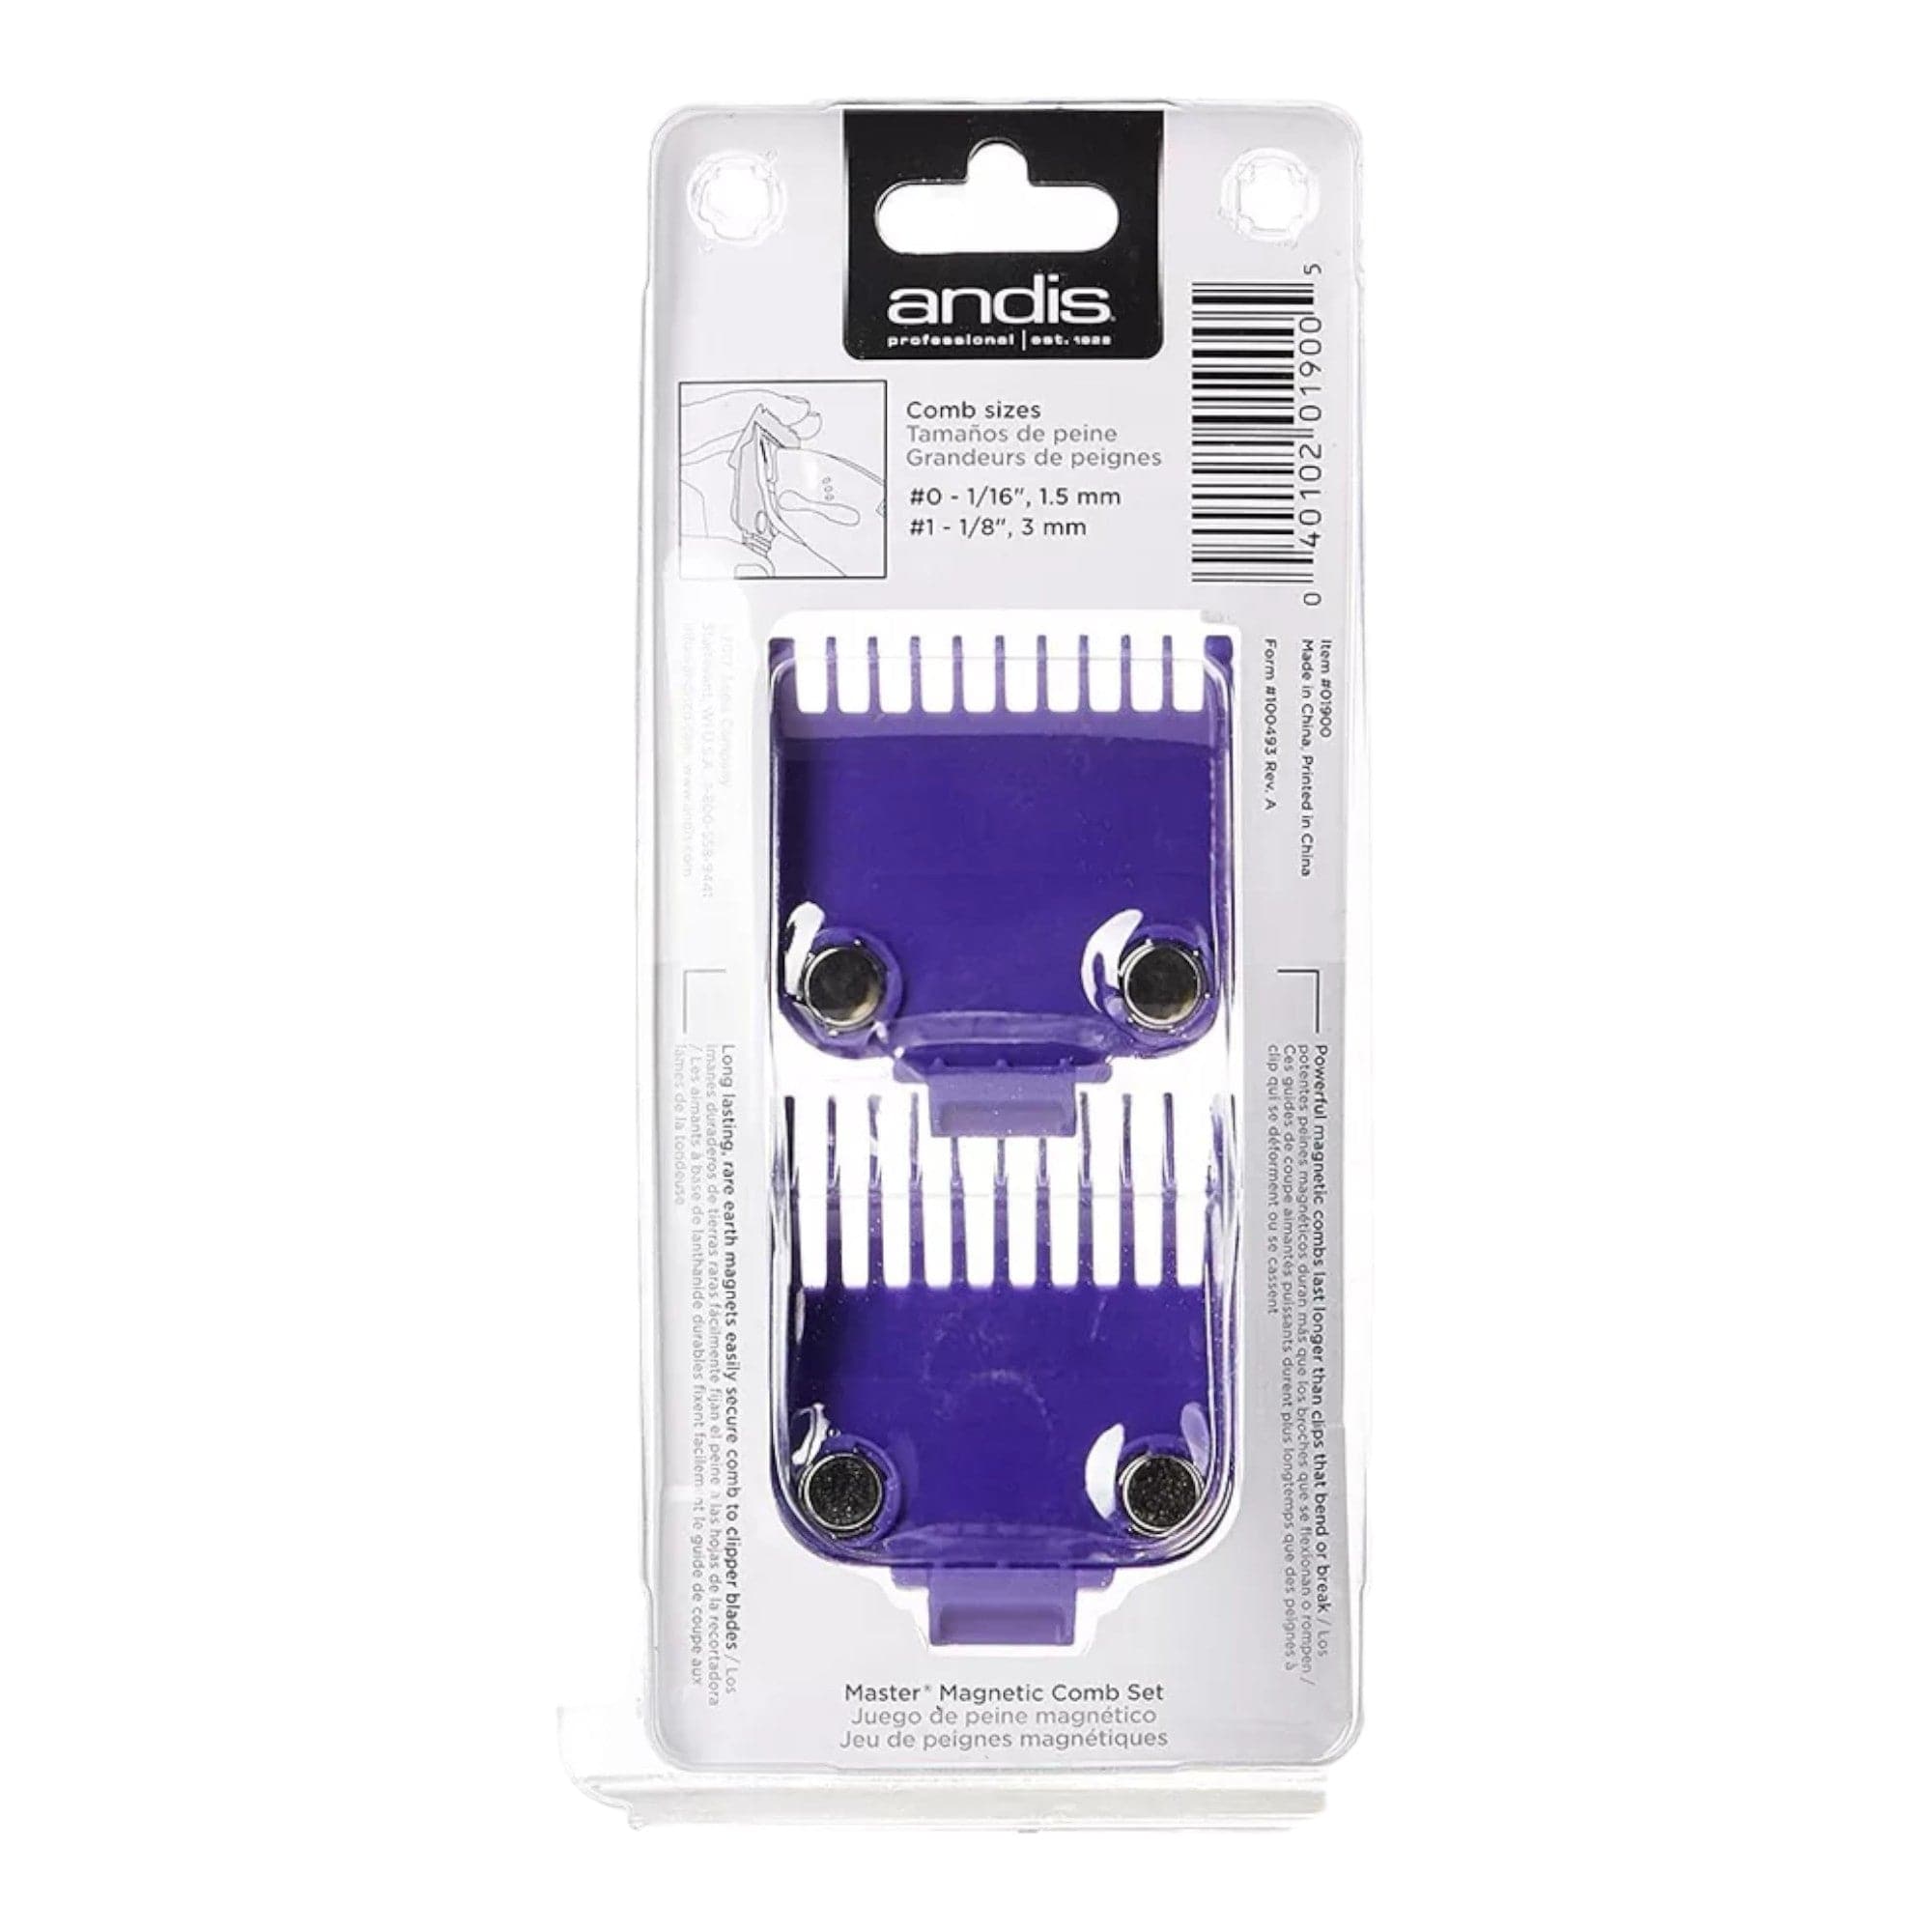 Andis - Master Magnetic Comb Set - Dual Pack 0 & 1 Sizes: 0, 1 (1/16", 1/8") for Master Clipper Series AS01900N